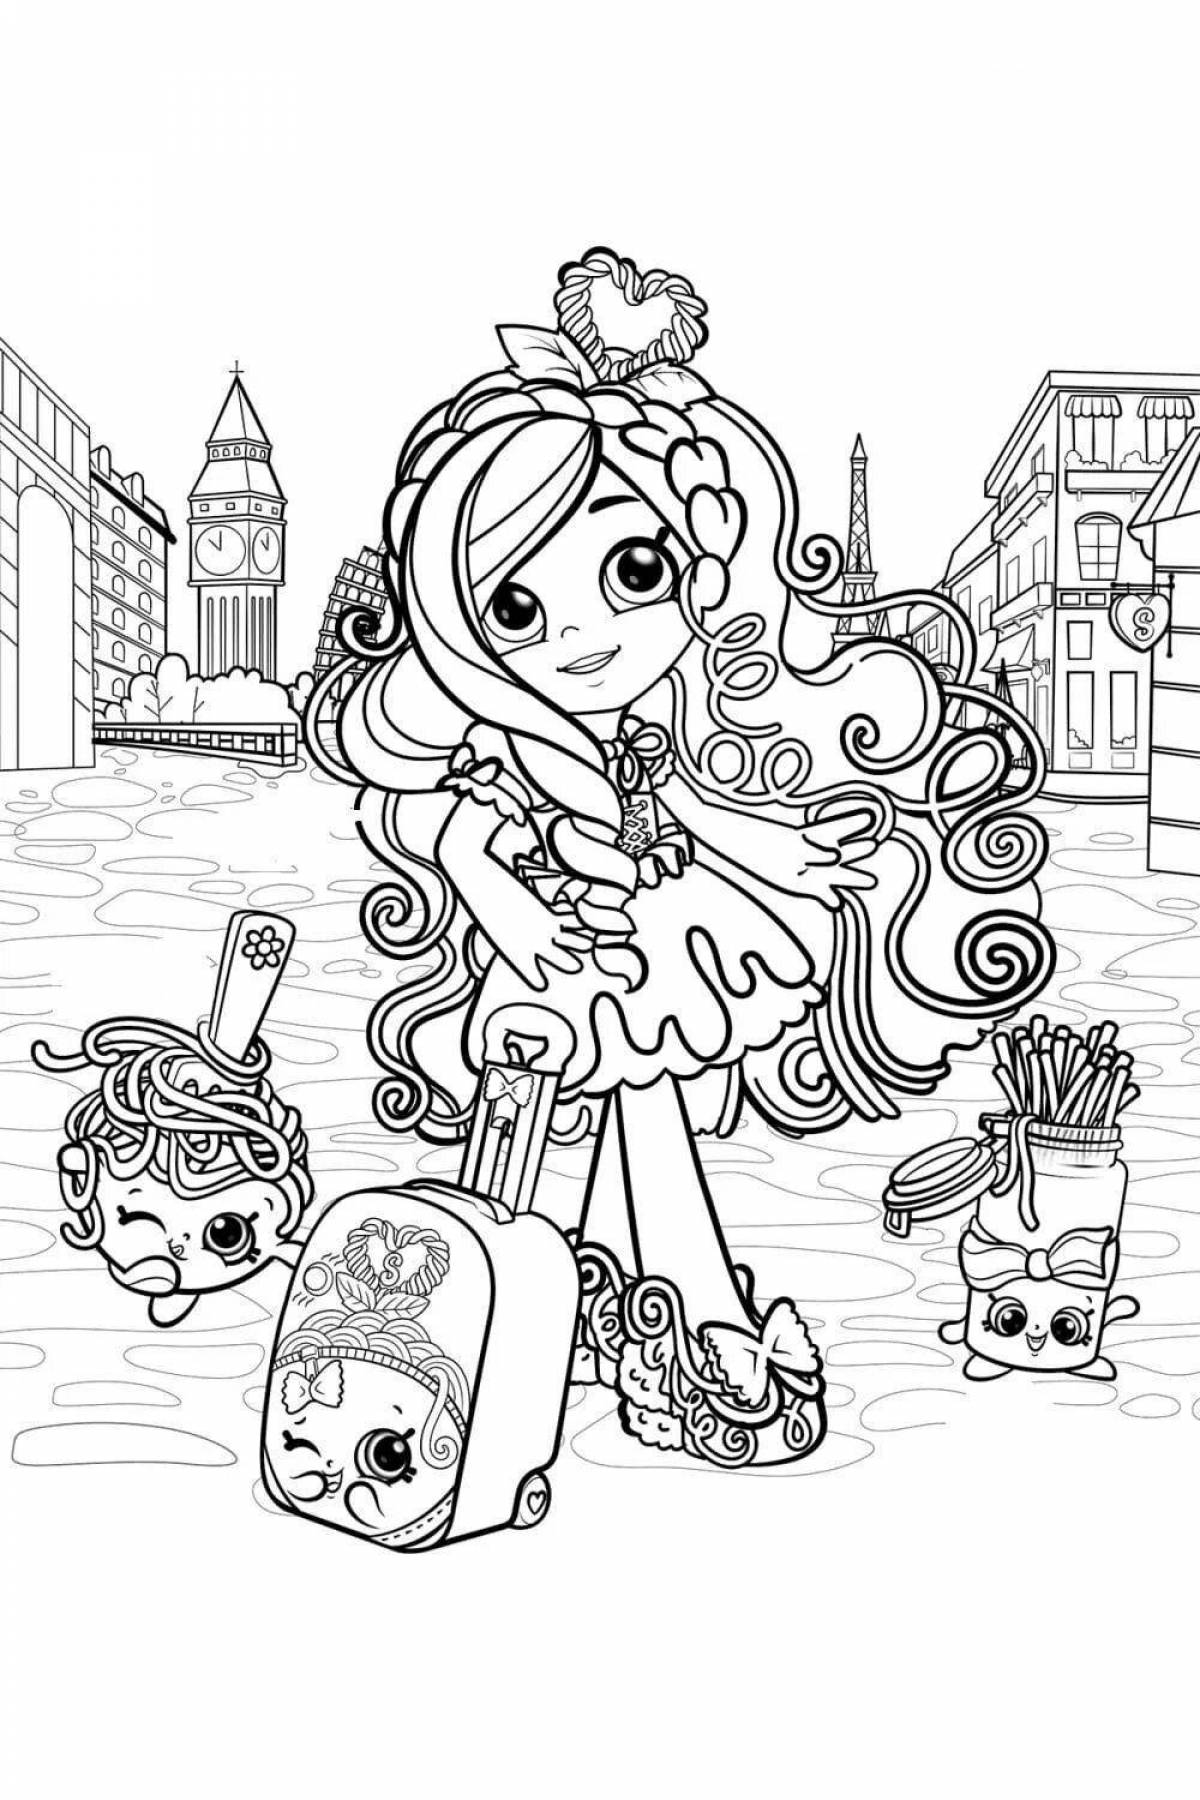 Cute chachimoles coloring page